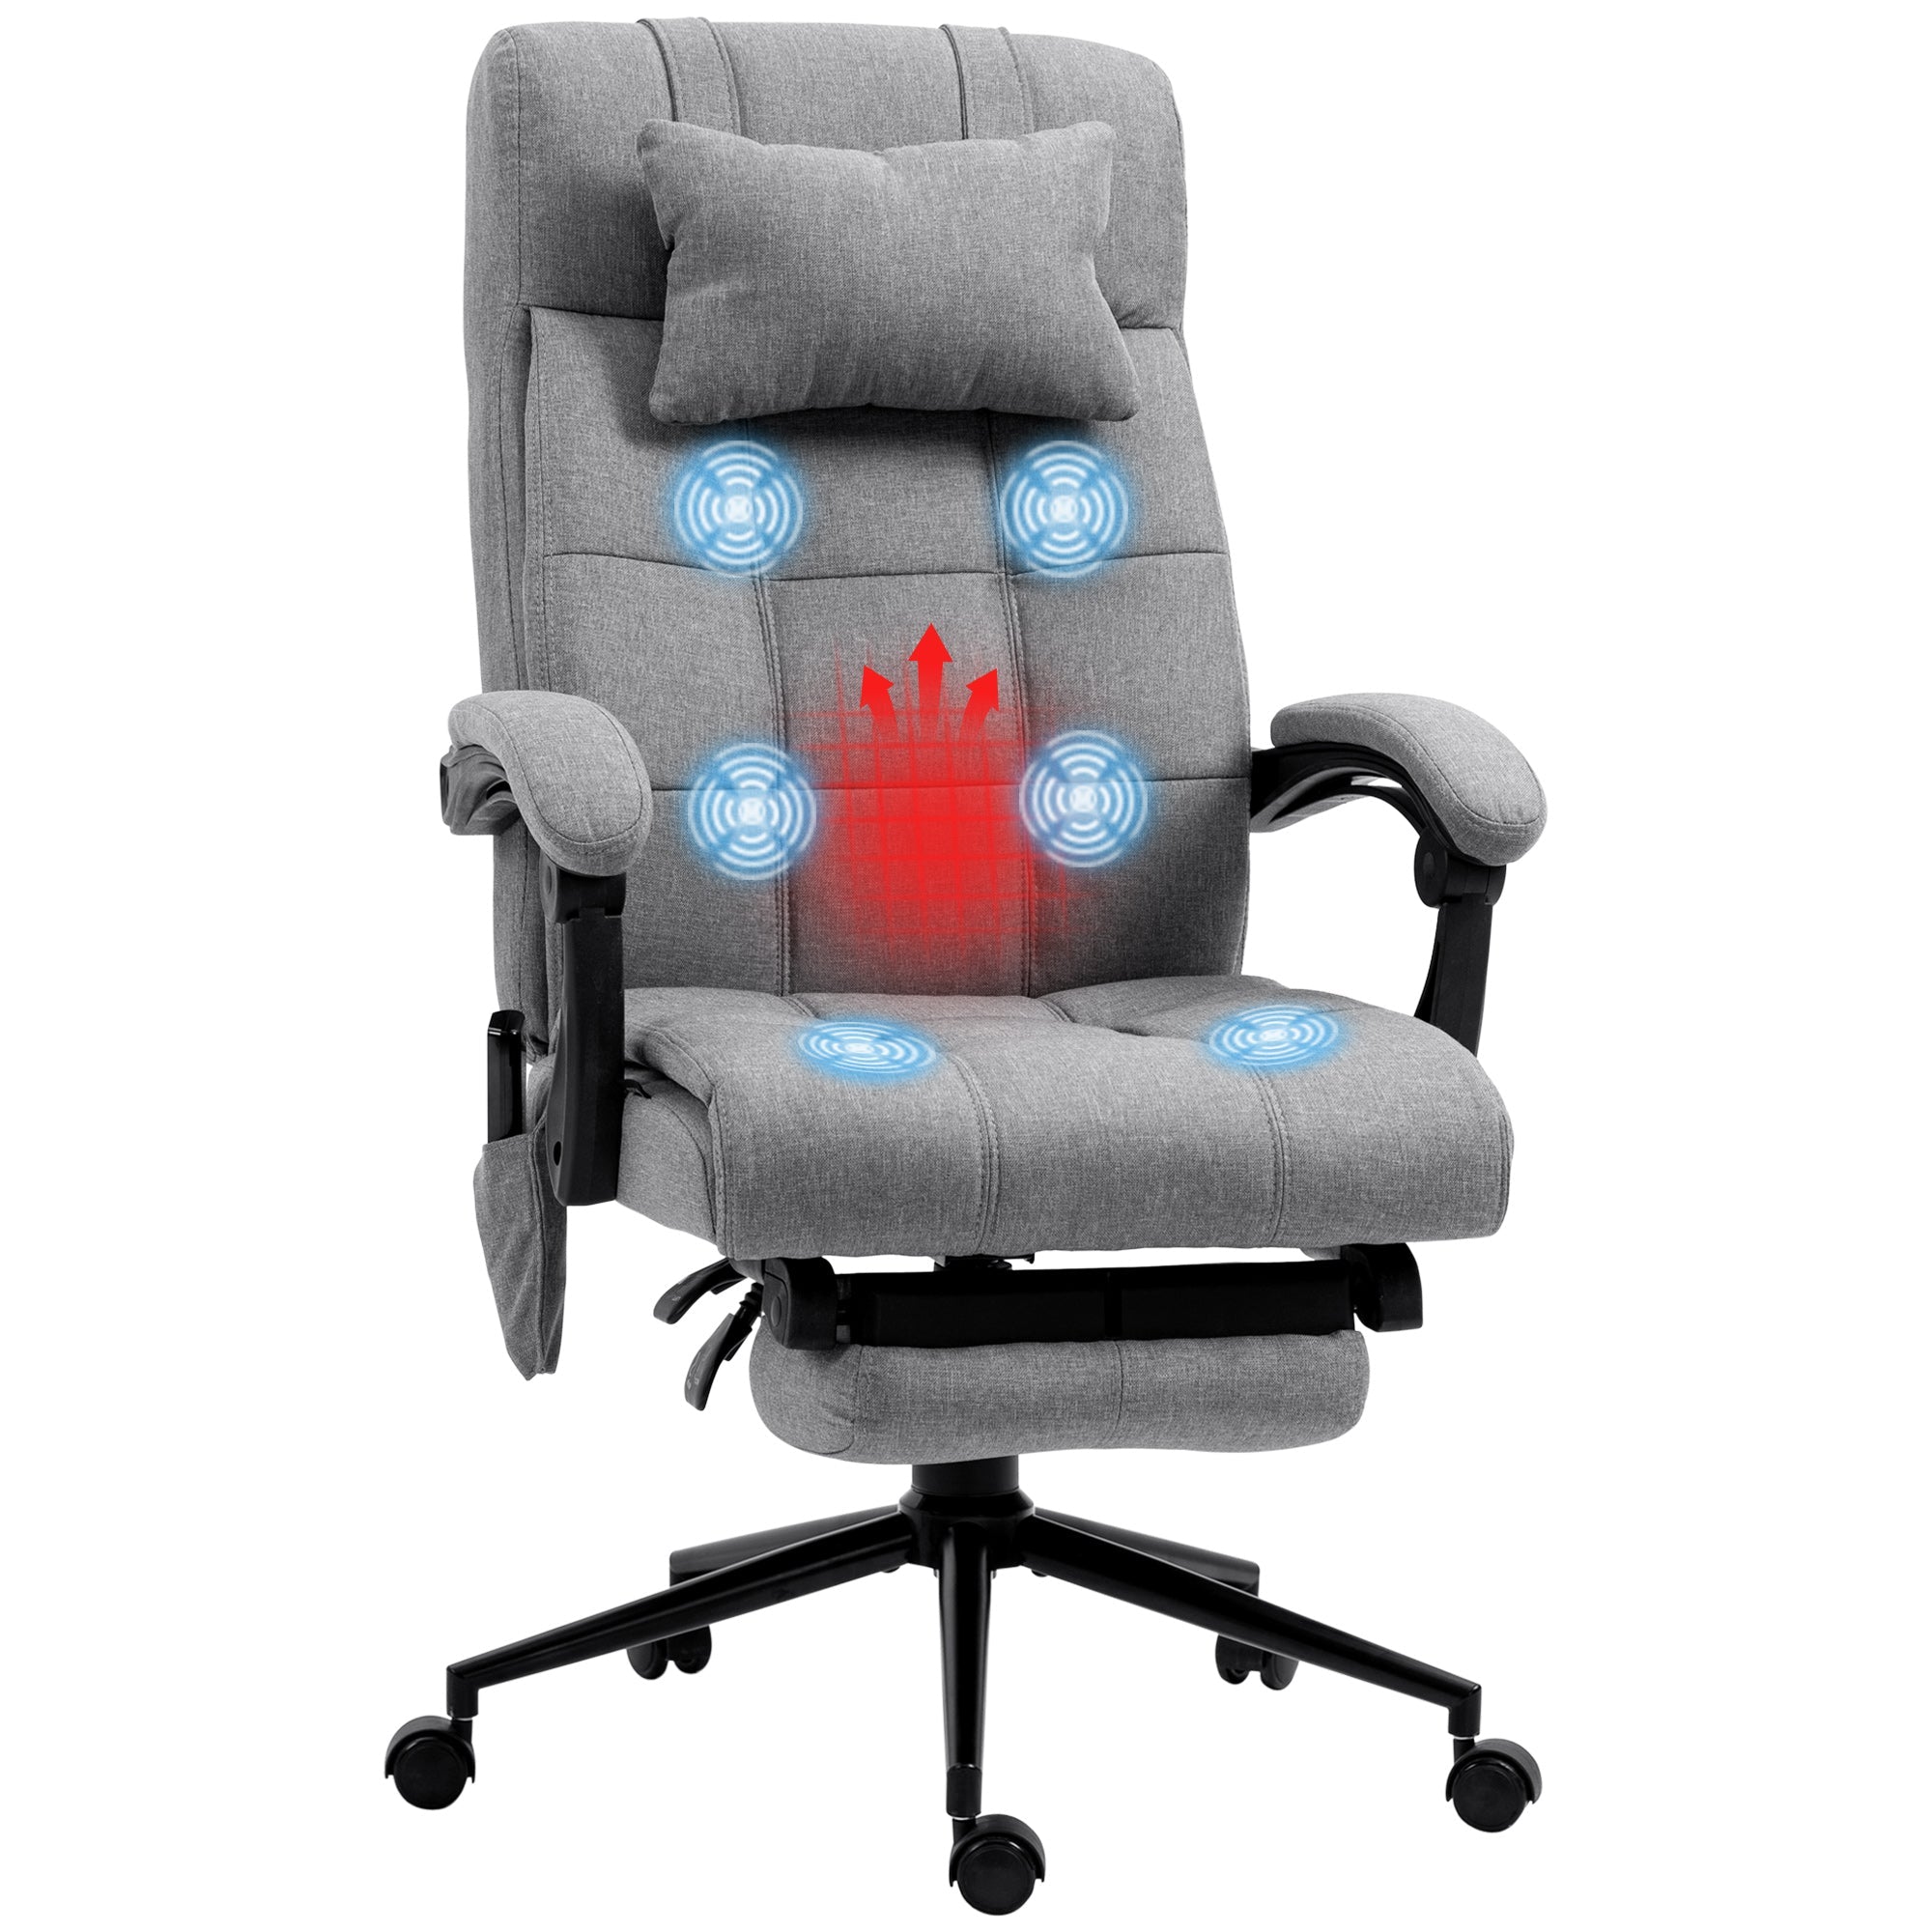 Vibration Massage Office Chair with Heat, Fabric Computer Chair with Head Pillow, Footrest, Armrest, Reclining Back, Grey-0